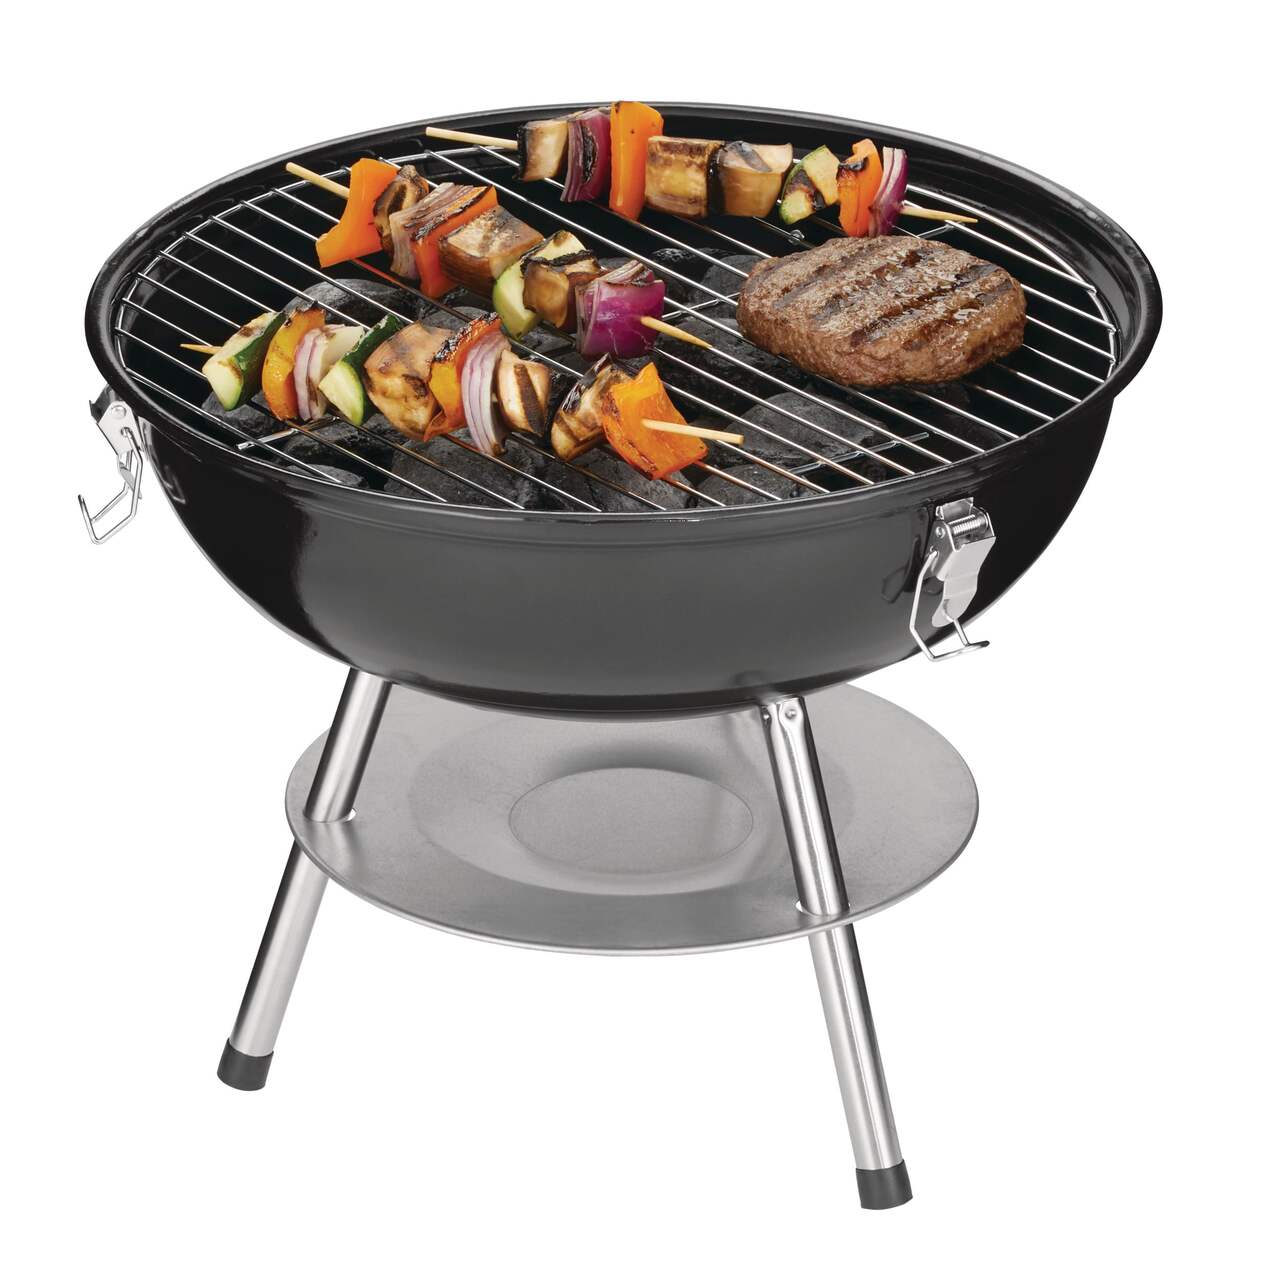 MASTER Chef Portable 14-In Charcoal Kettle BBQ Grill with a